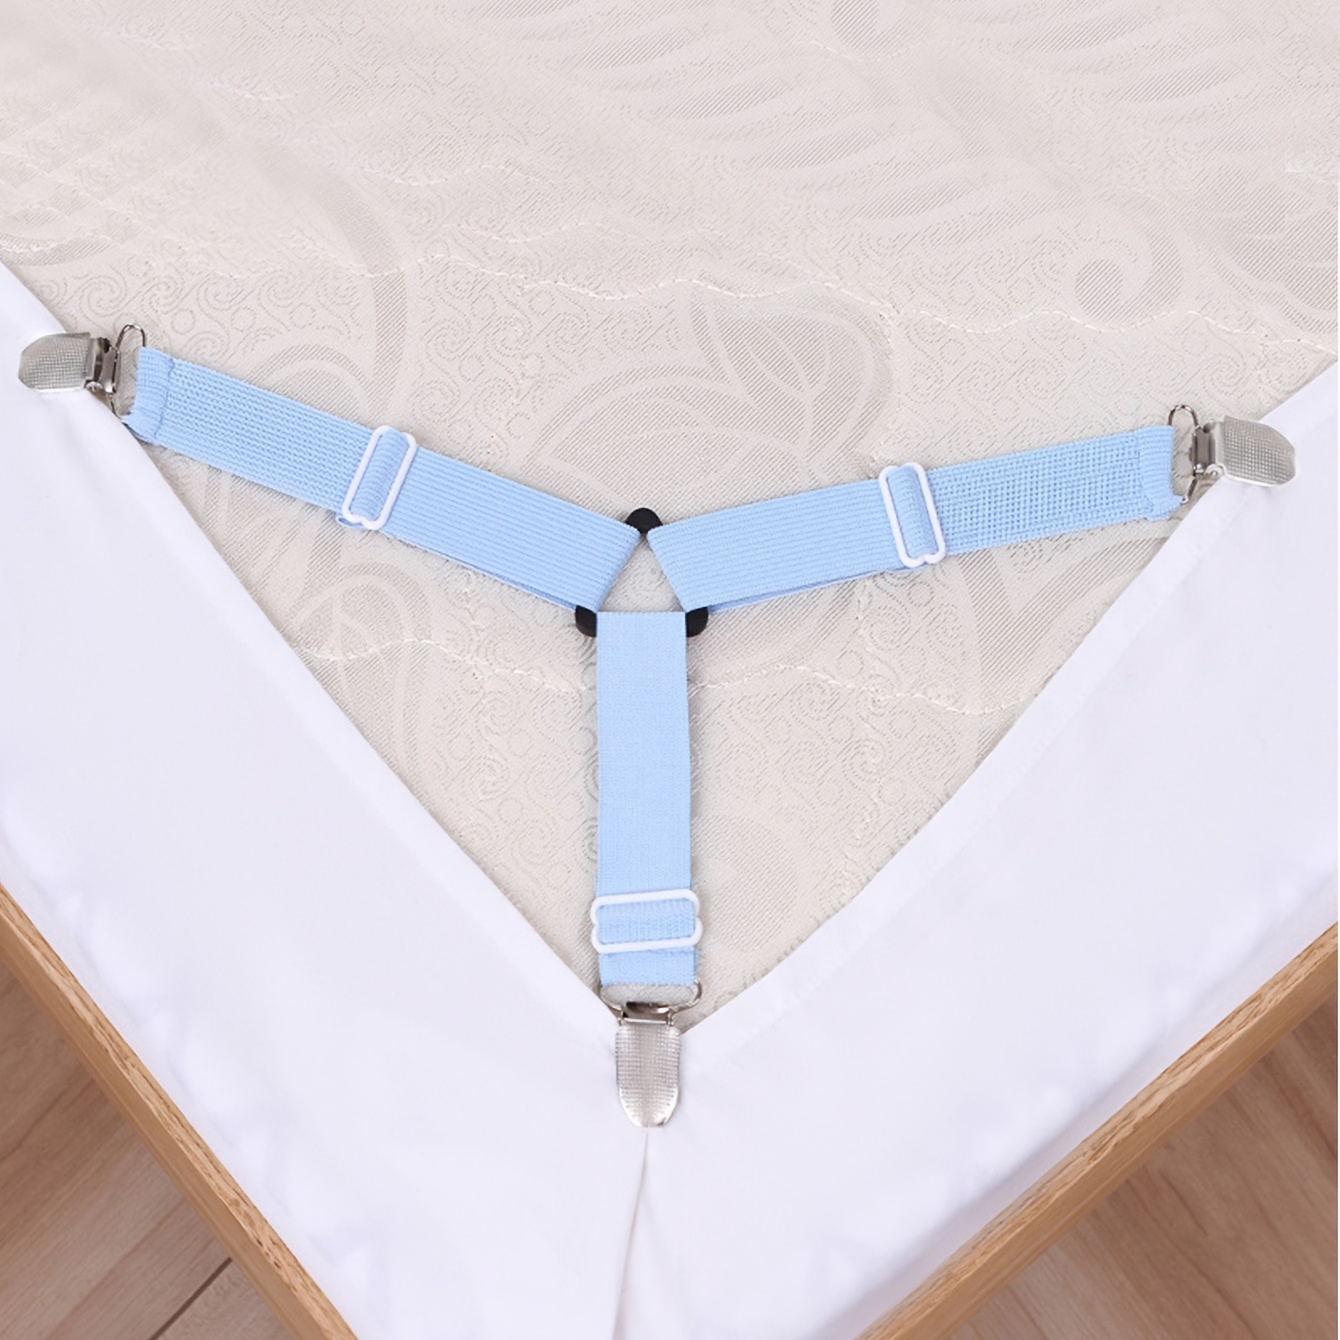 Bed Sheet Straps Triangle Bed Sheet Holders Fitted Sheet Clips